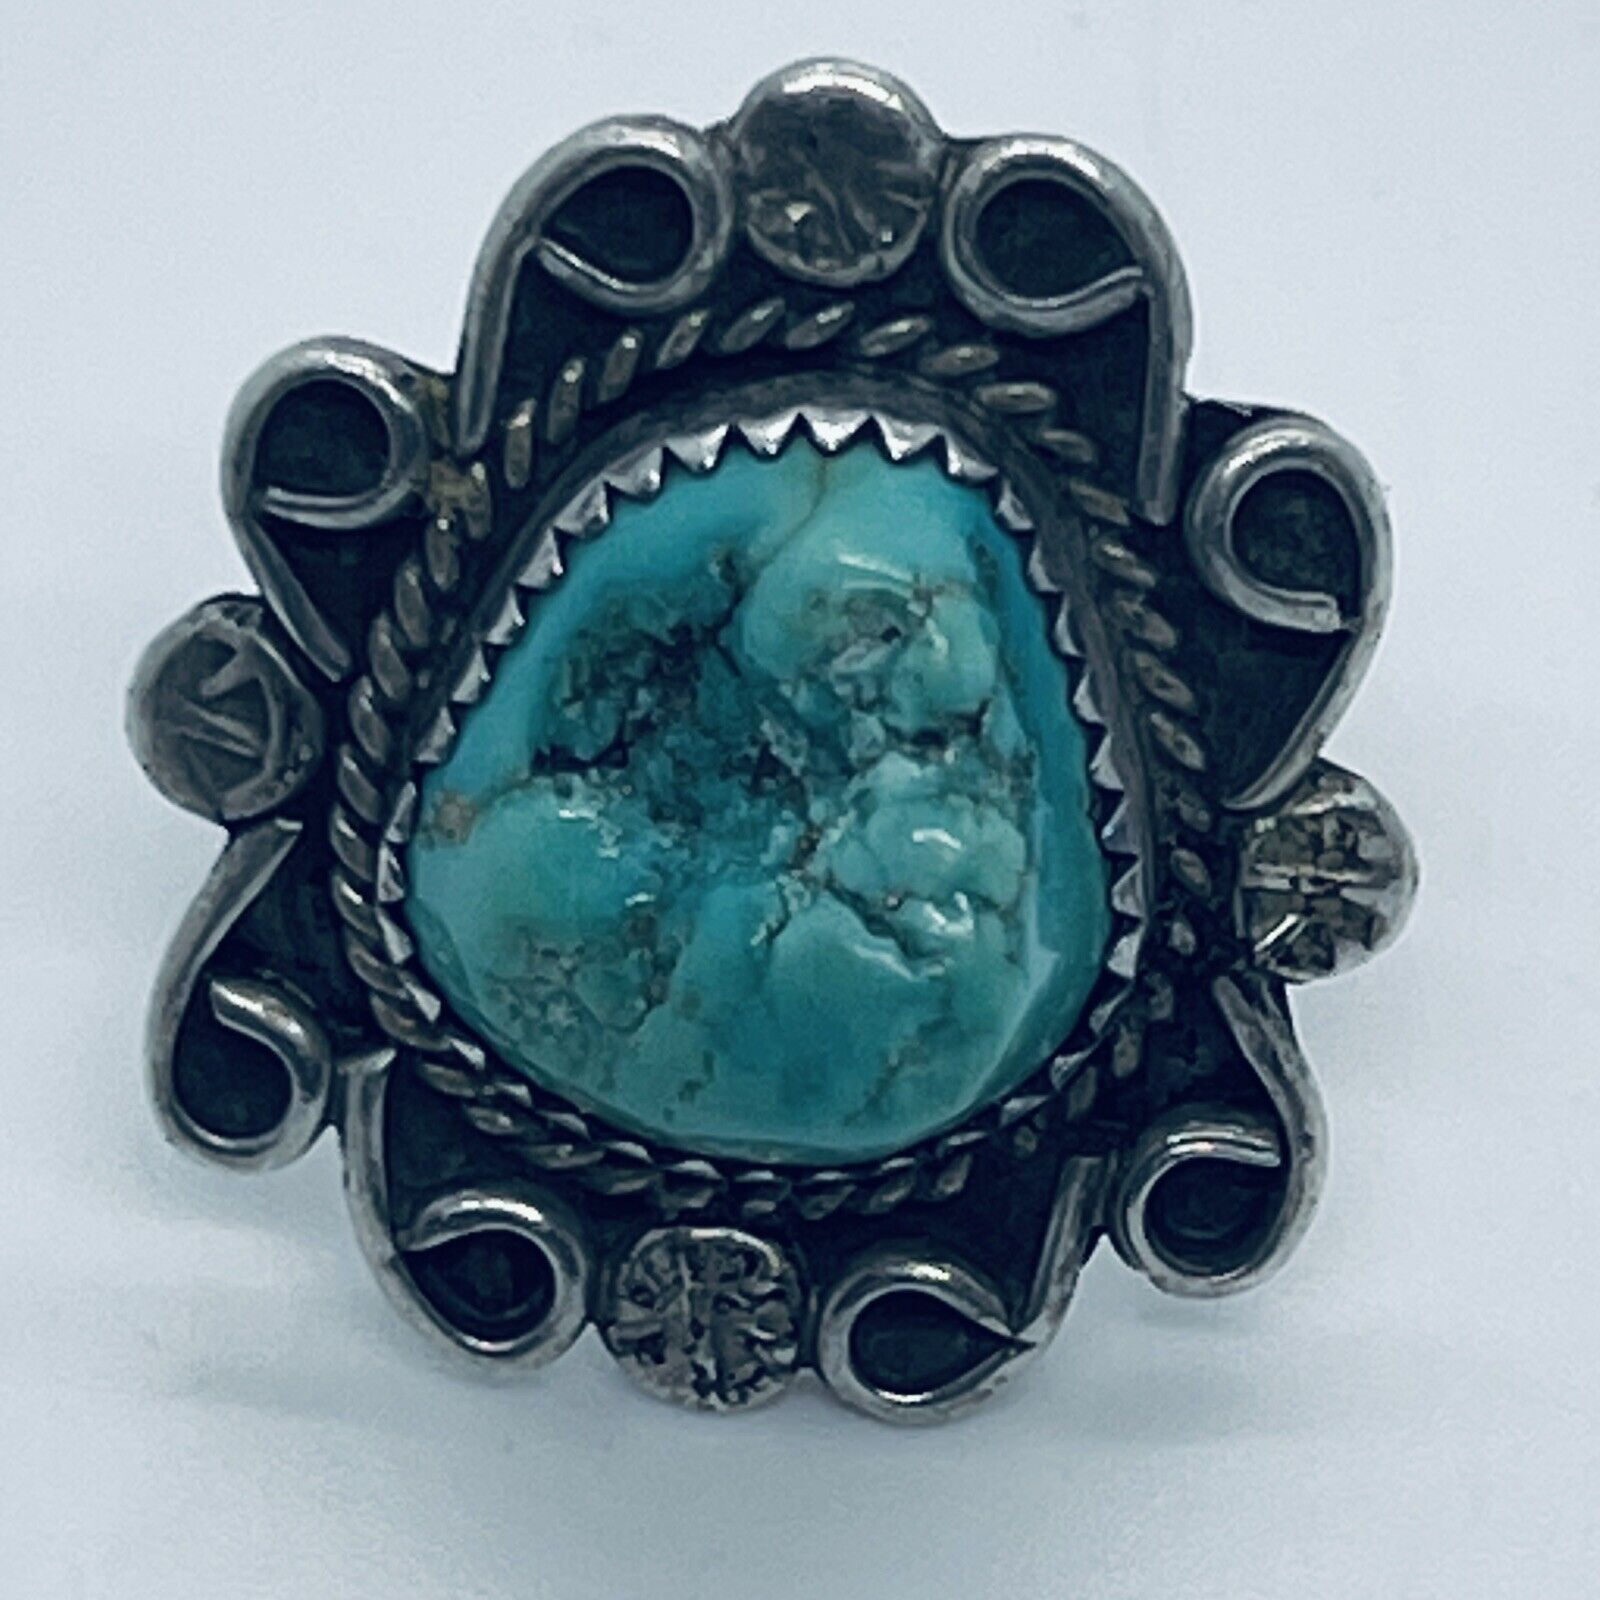 Vintage (1930s) Fred Harvey Era Handmade Navajo Silver Turquoise Nugget Ring